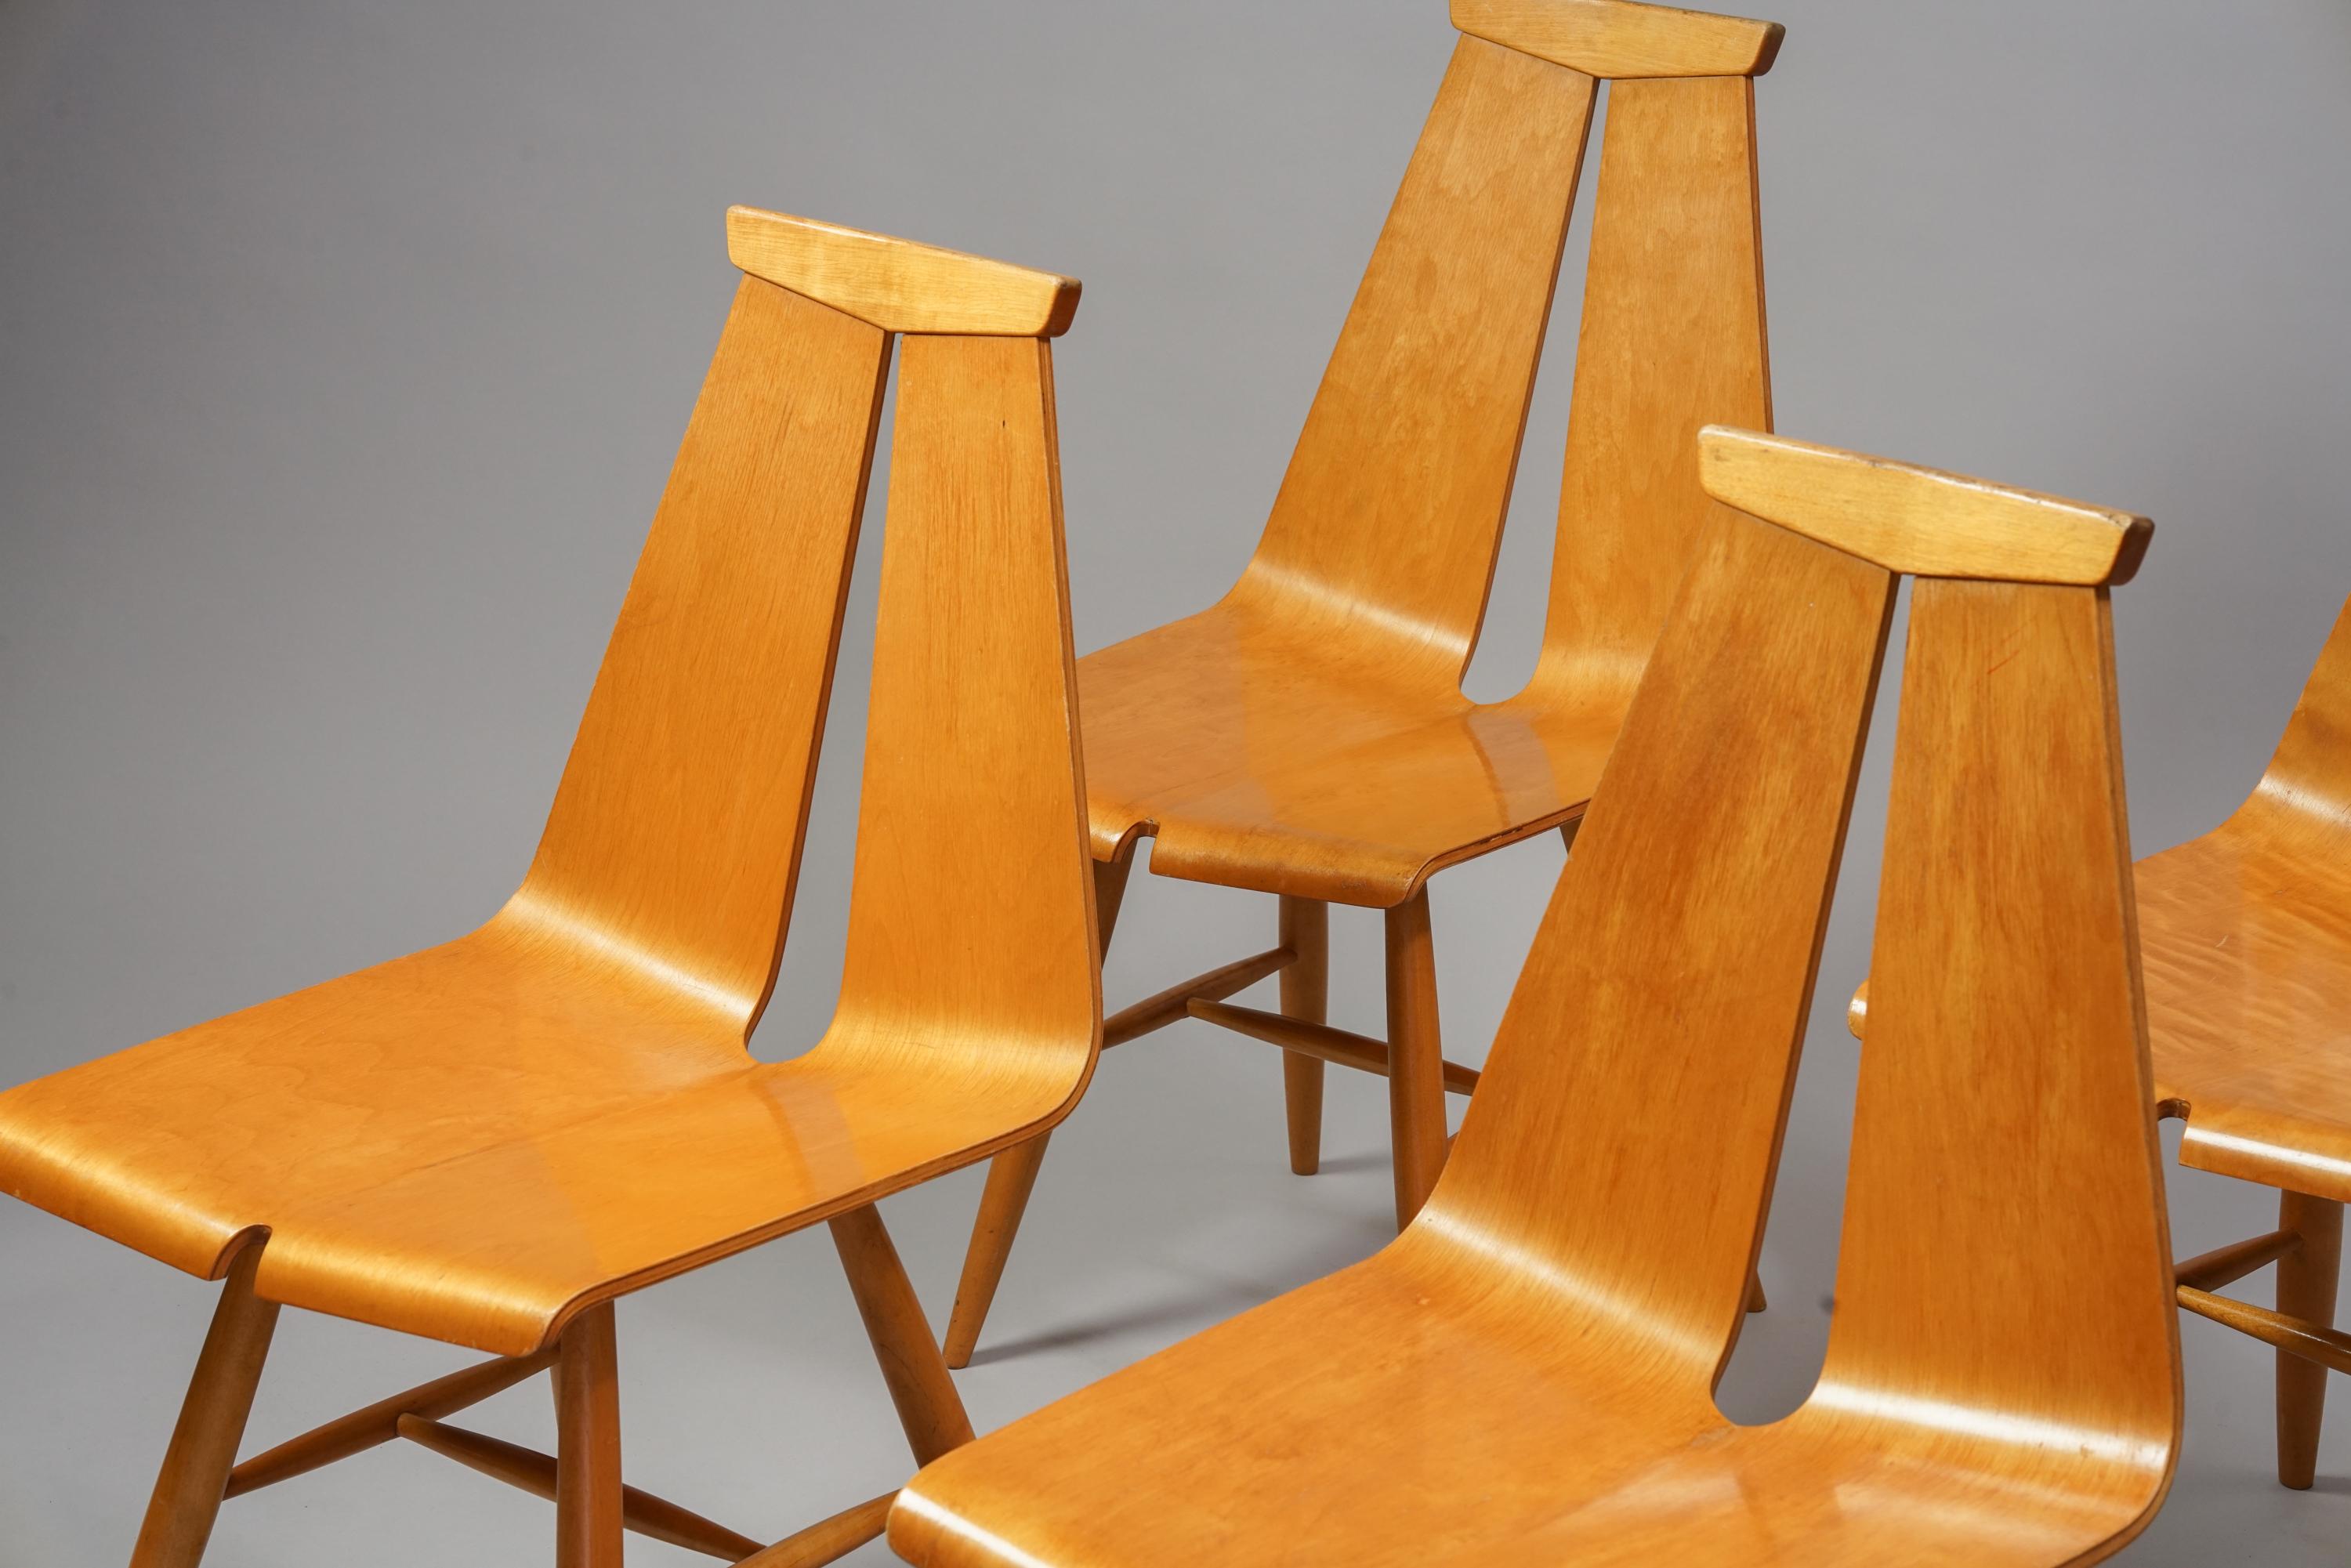 Finnish Set of 4 Model 441 Dining Chairs in Birch by Risto Halme for Isku, 1960s